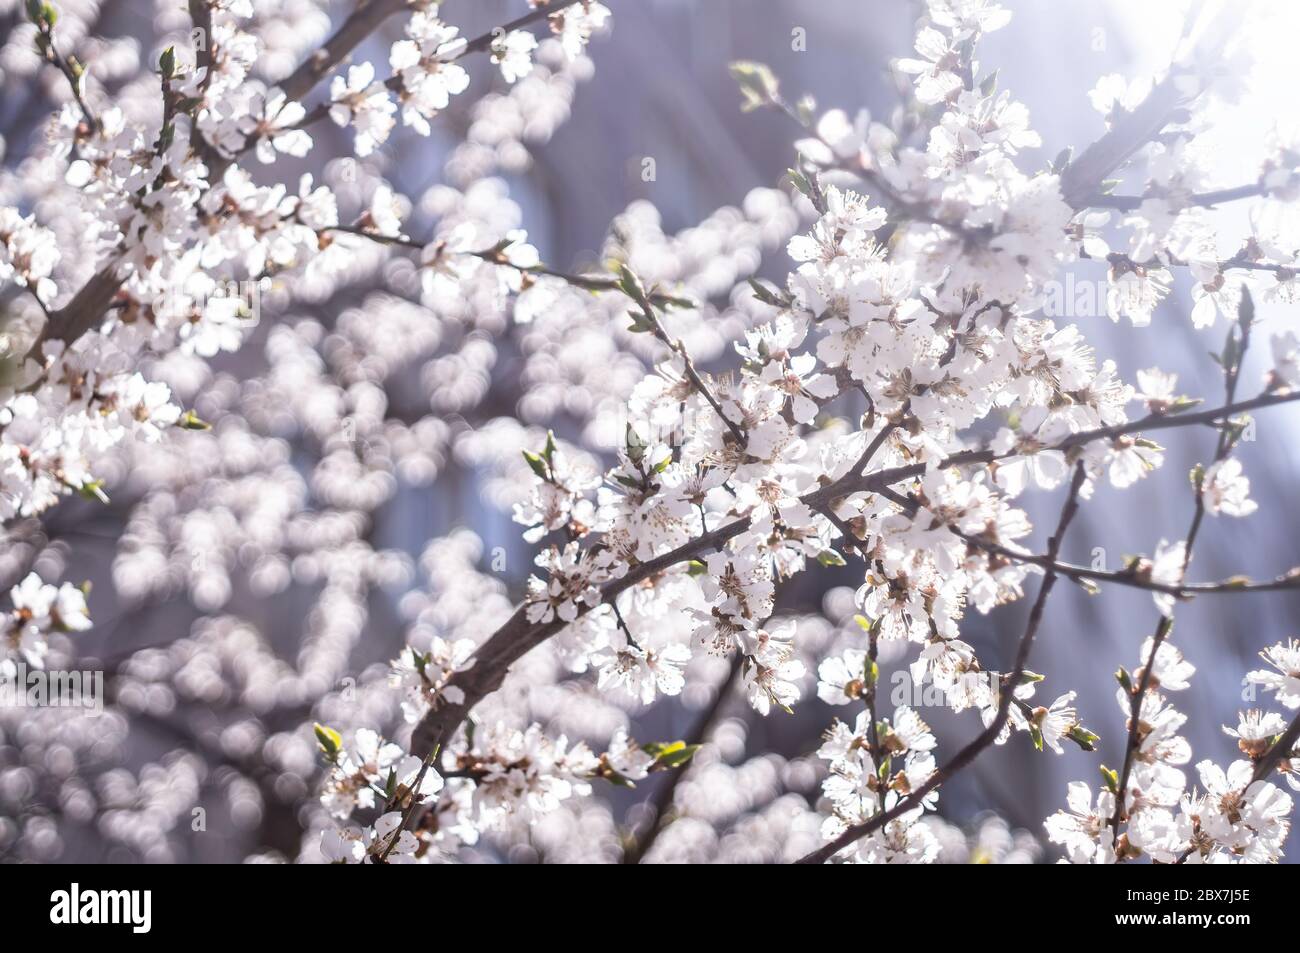 spring bloom of cherry or apple tree with white flowers at blue blurred background with lens flare Stock Photo